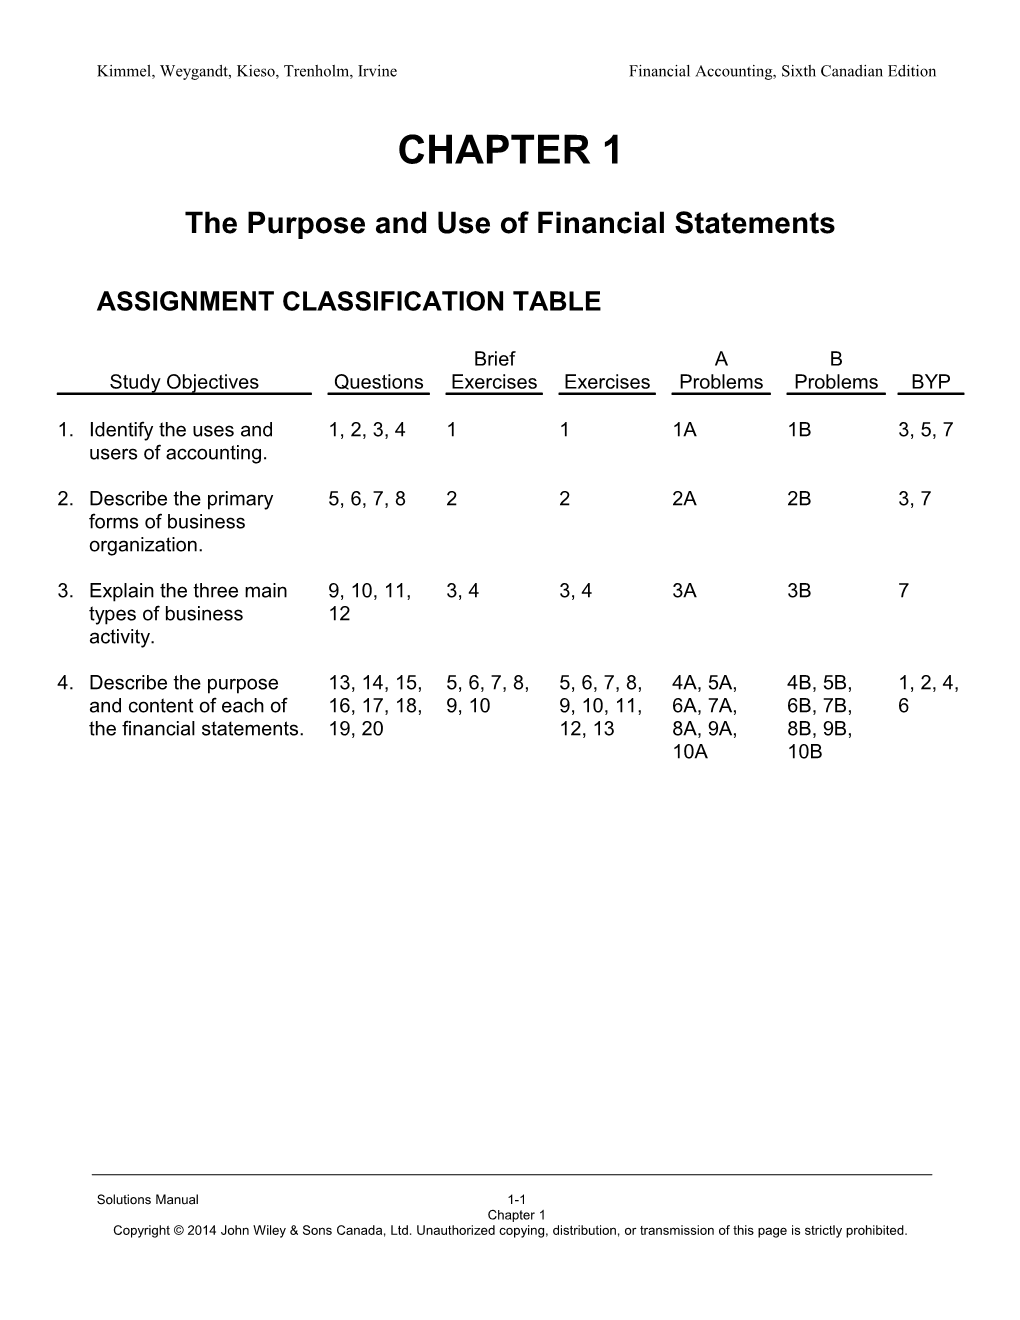 Chapter 1: the Purpose and Use of Financial Statements